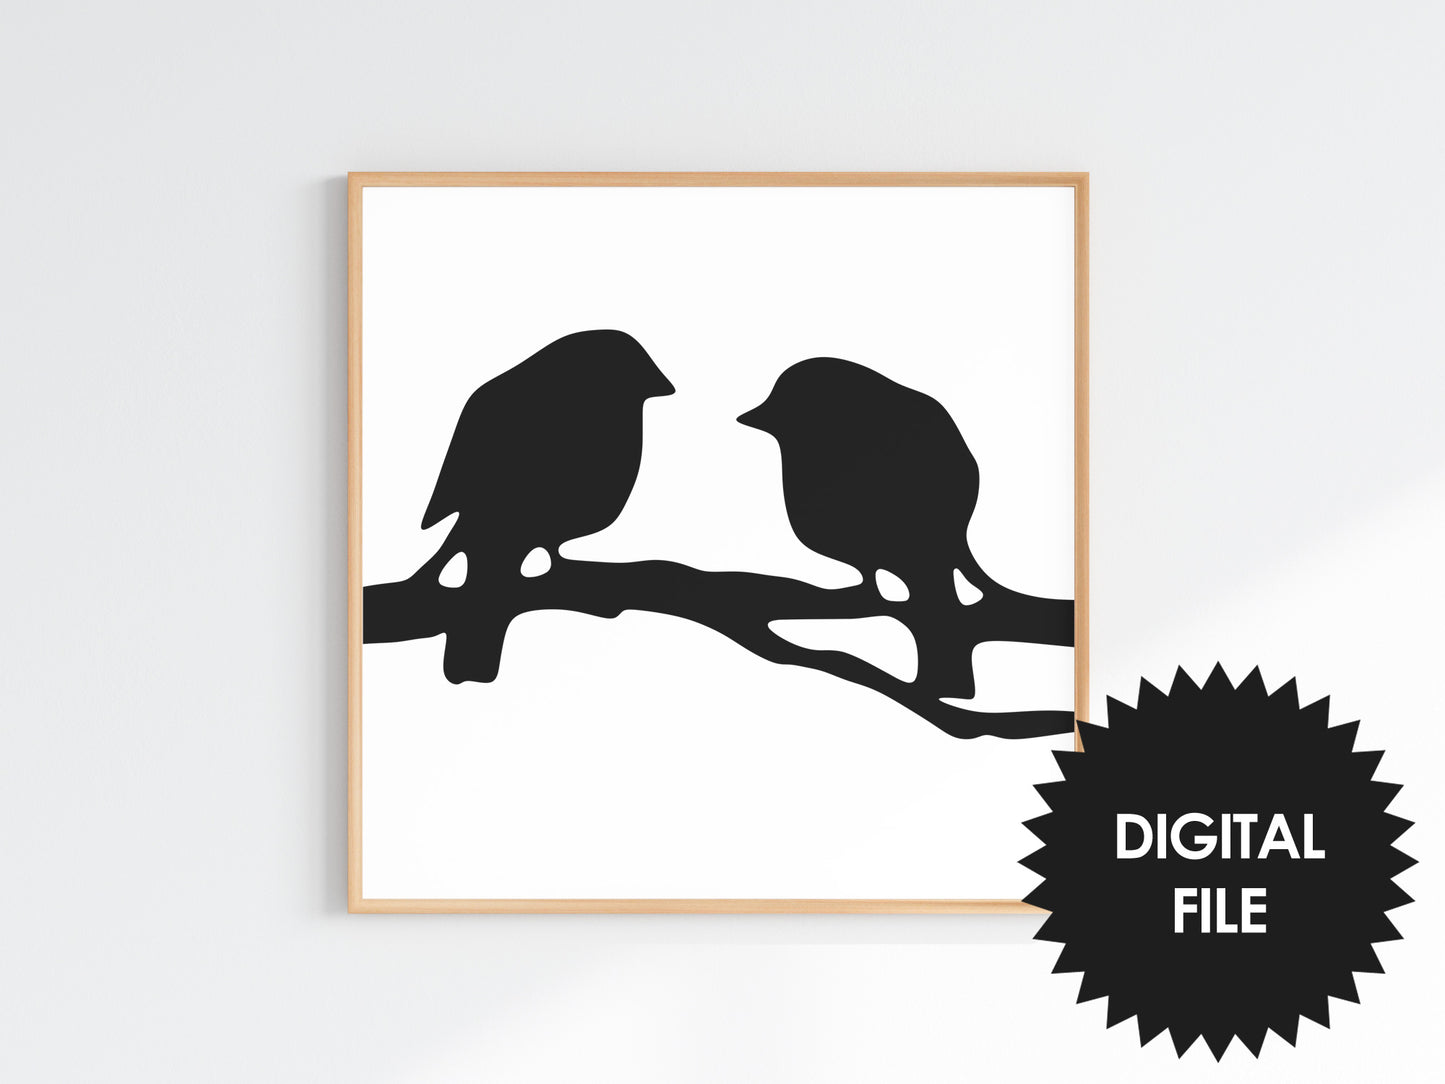 Birds Simple Abstract Art Print, Set of 2, Black & White Wall Art, Digital Art Poster Download, Modern Square Art Prints, Print Up To 20x20inches